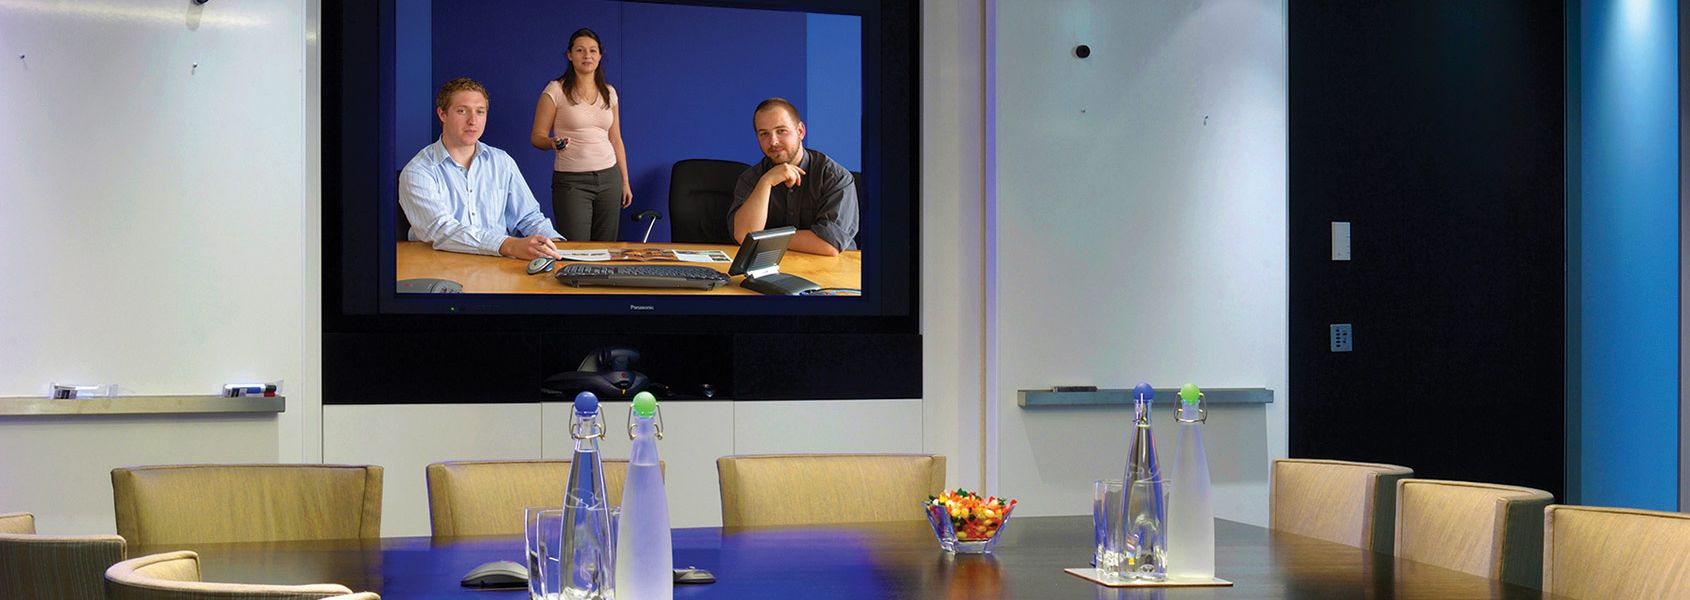 Video Conferencing / Telepresence